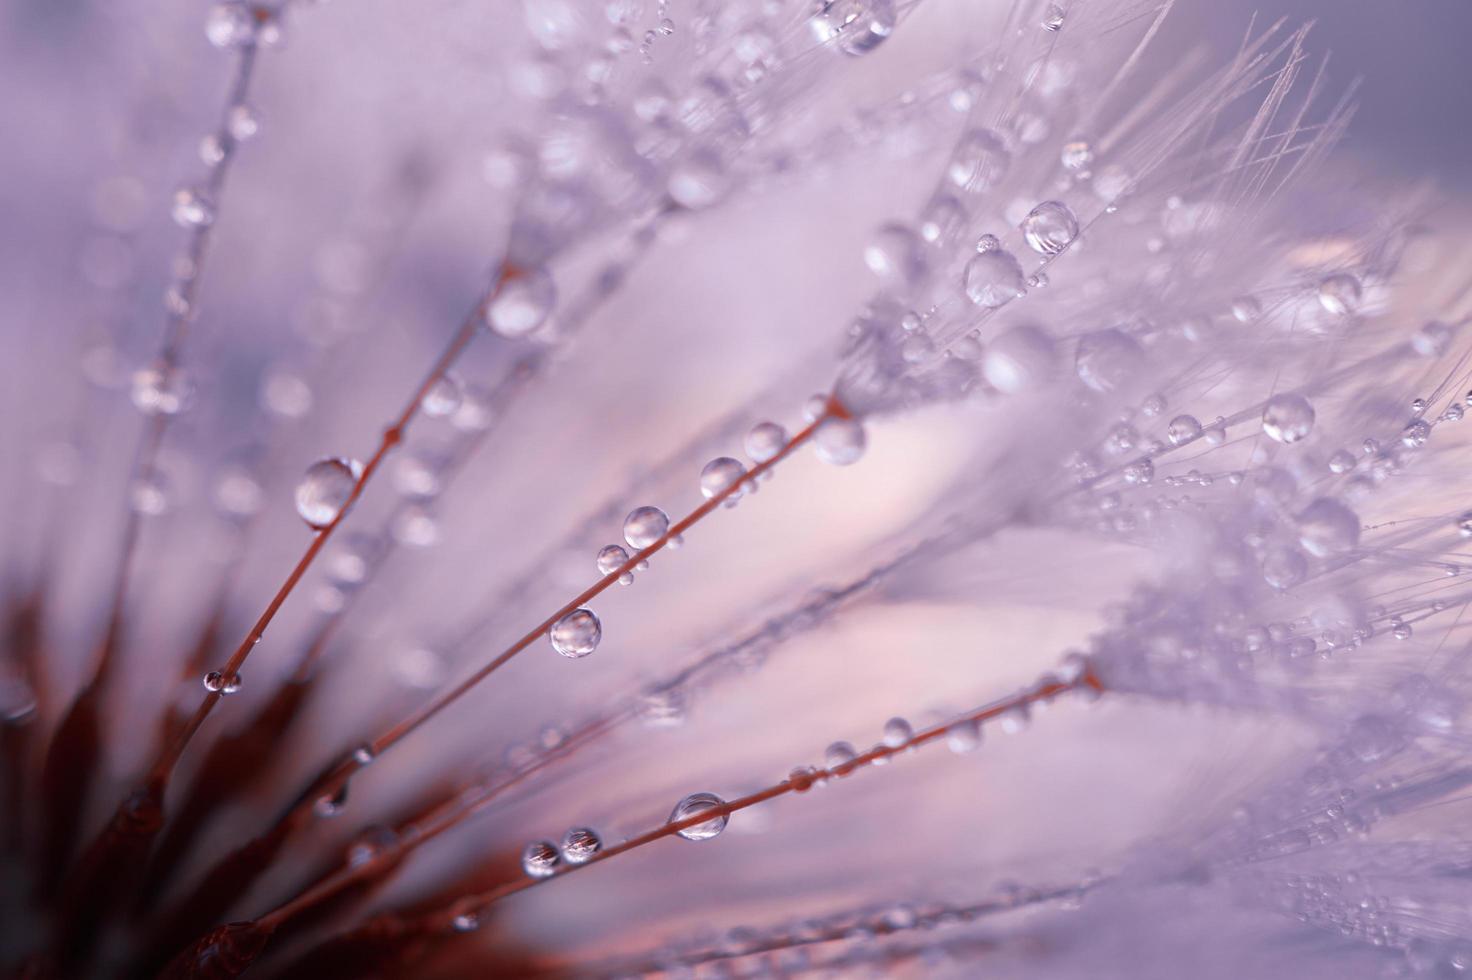 raindrops on the dandelion flower seed in rainy days in springtime photo